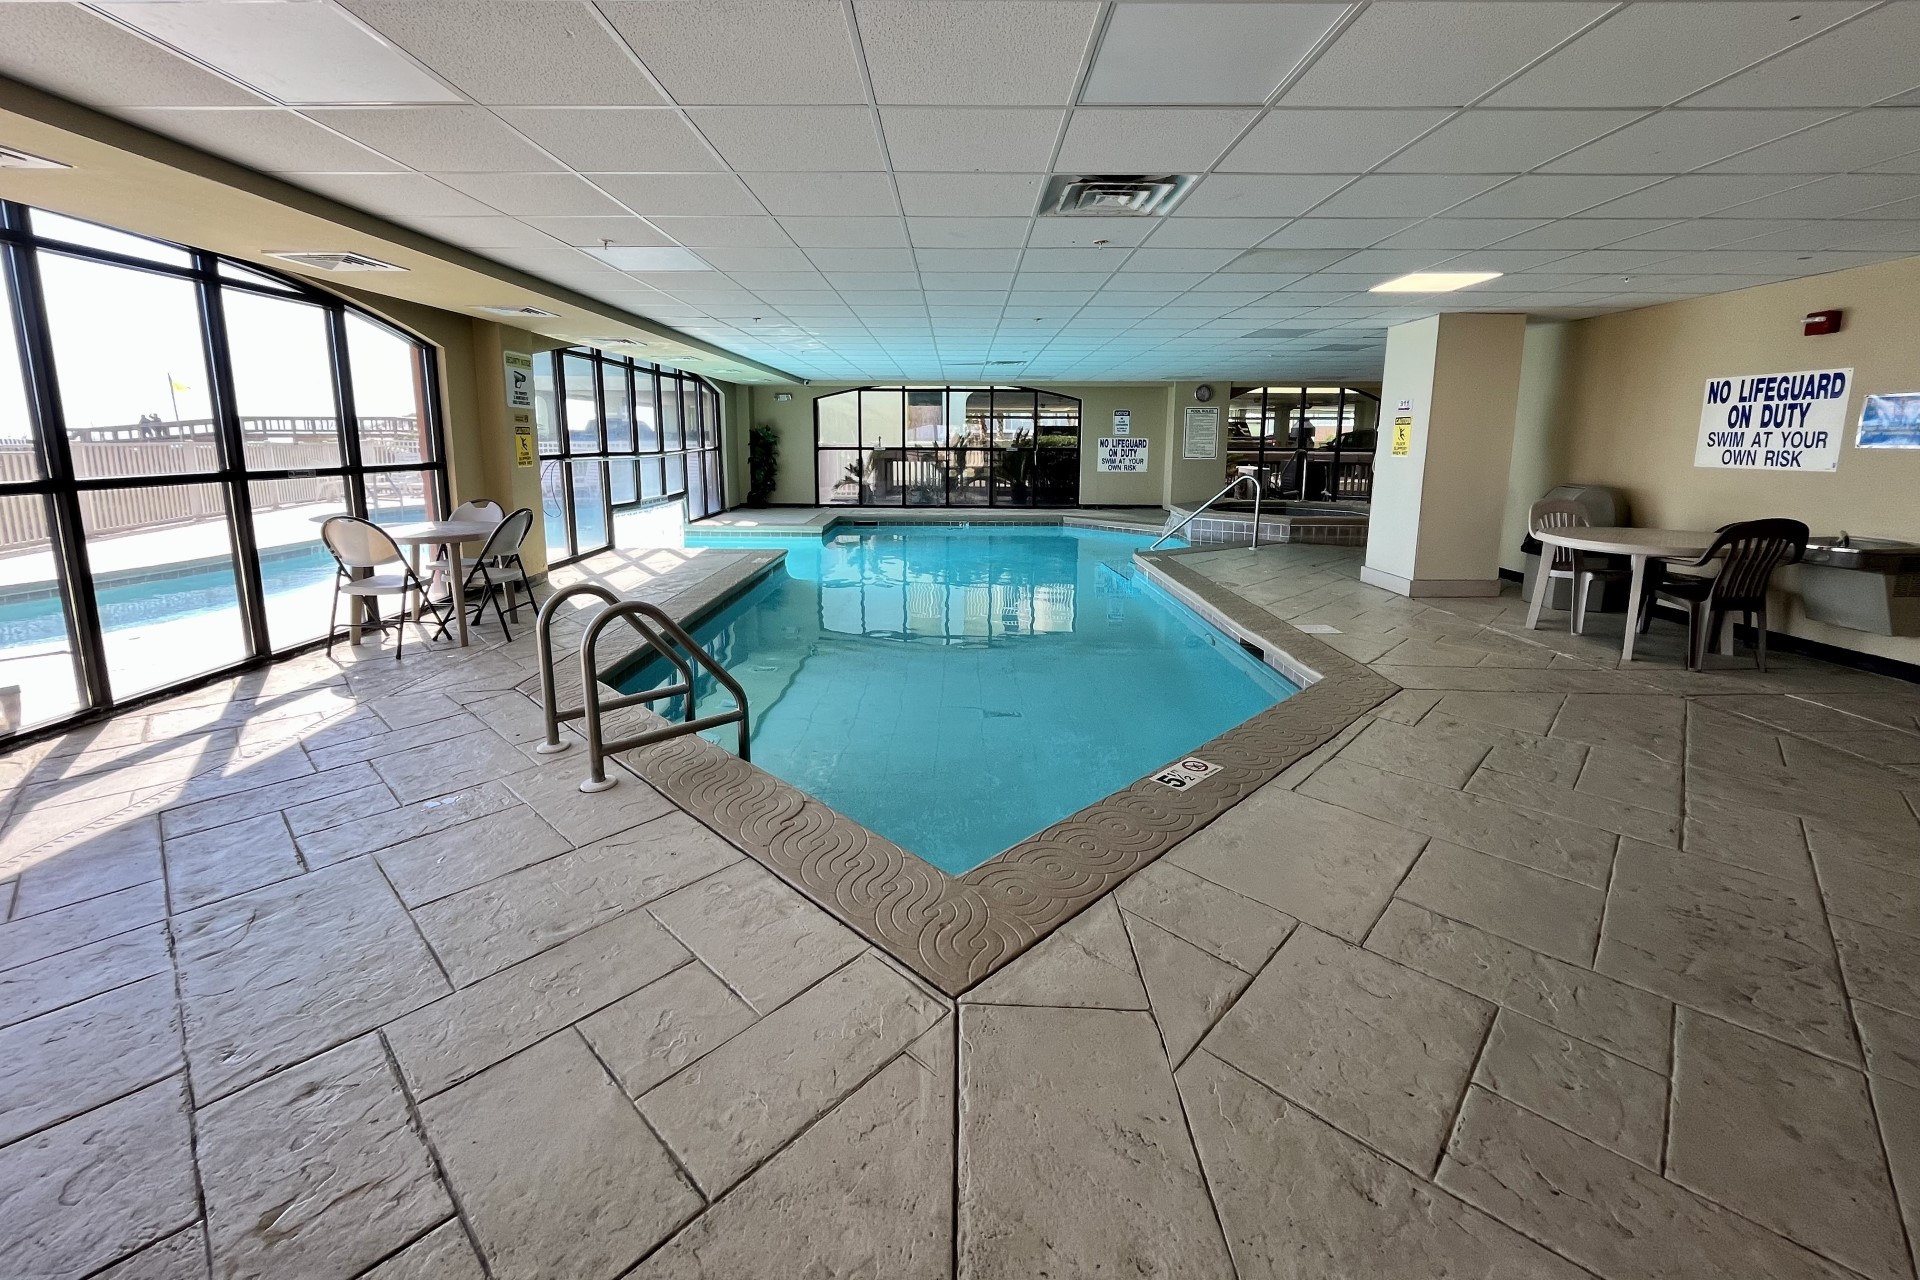 Indoor portion of the pool